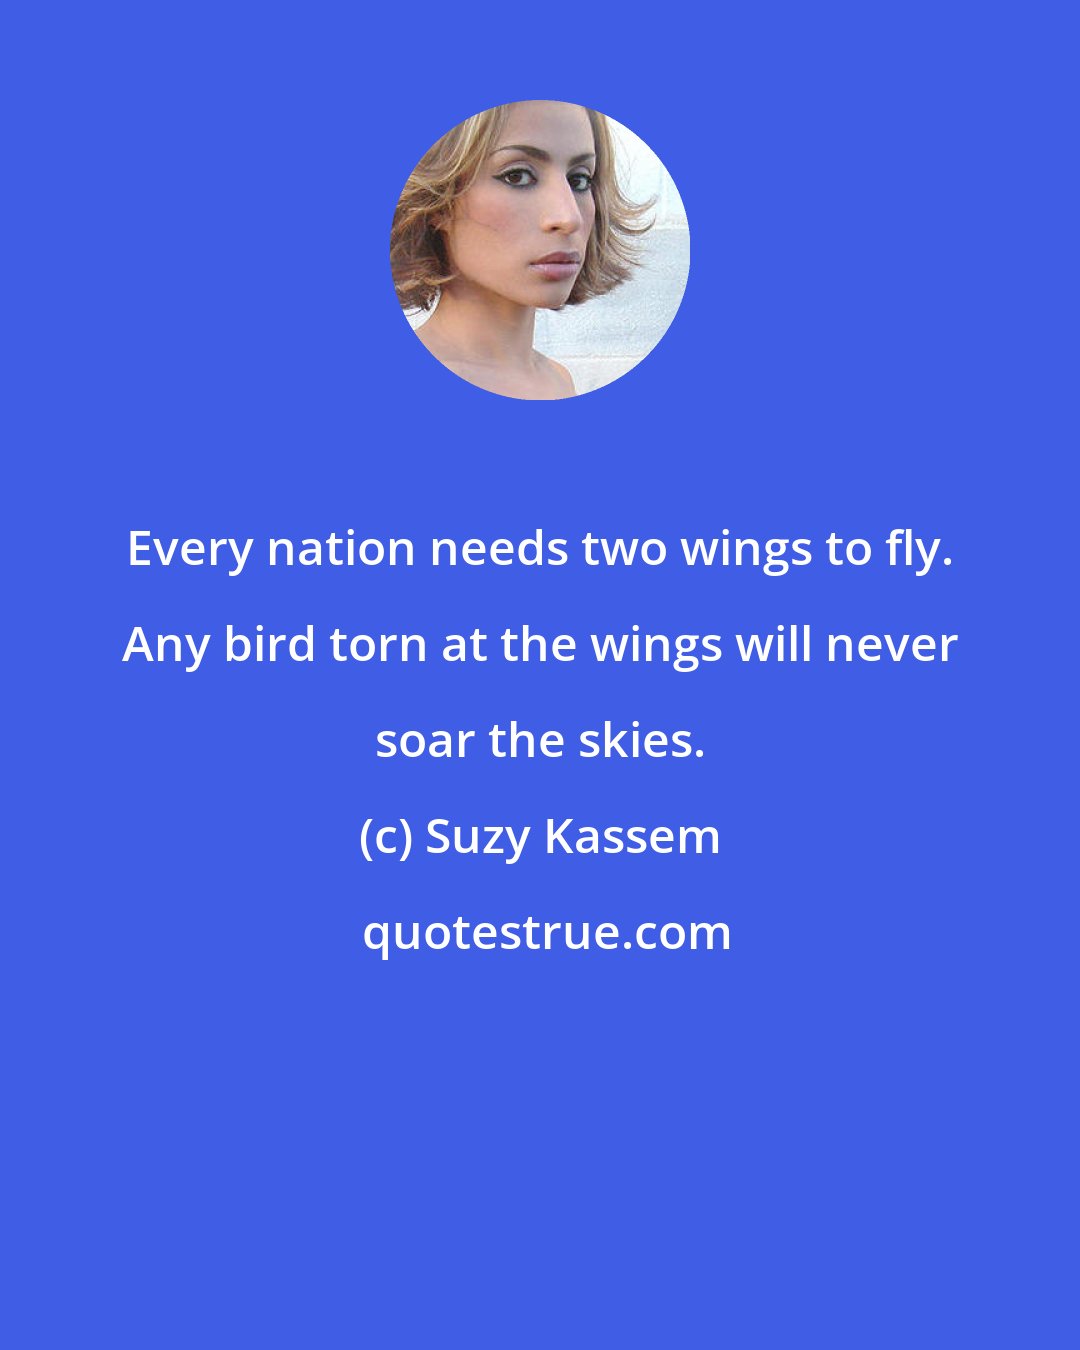 Suzy Kassem: Every nation needs two wings to fly. Any bird torn at the wings will never soar the skies.